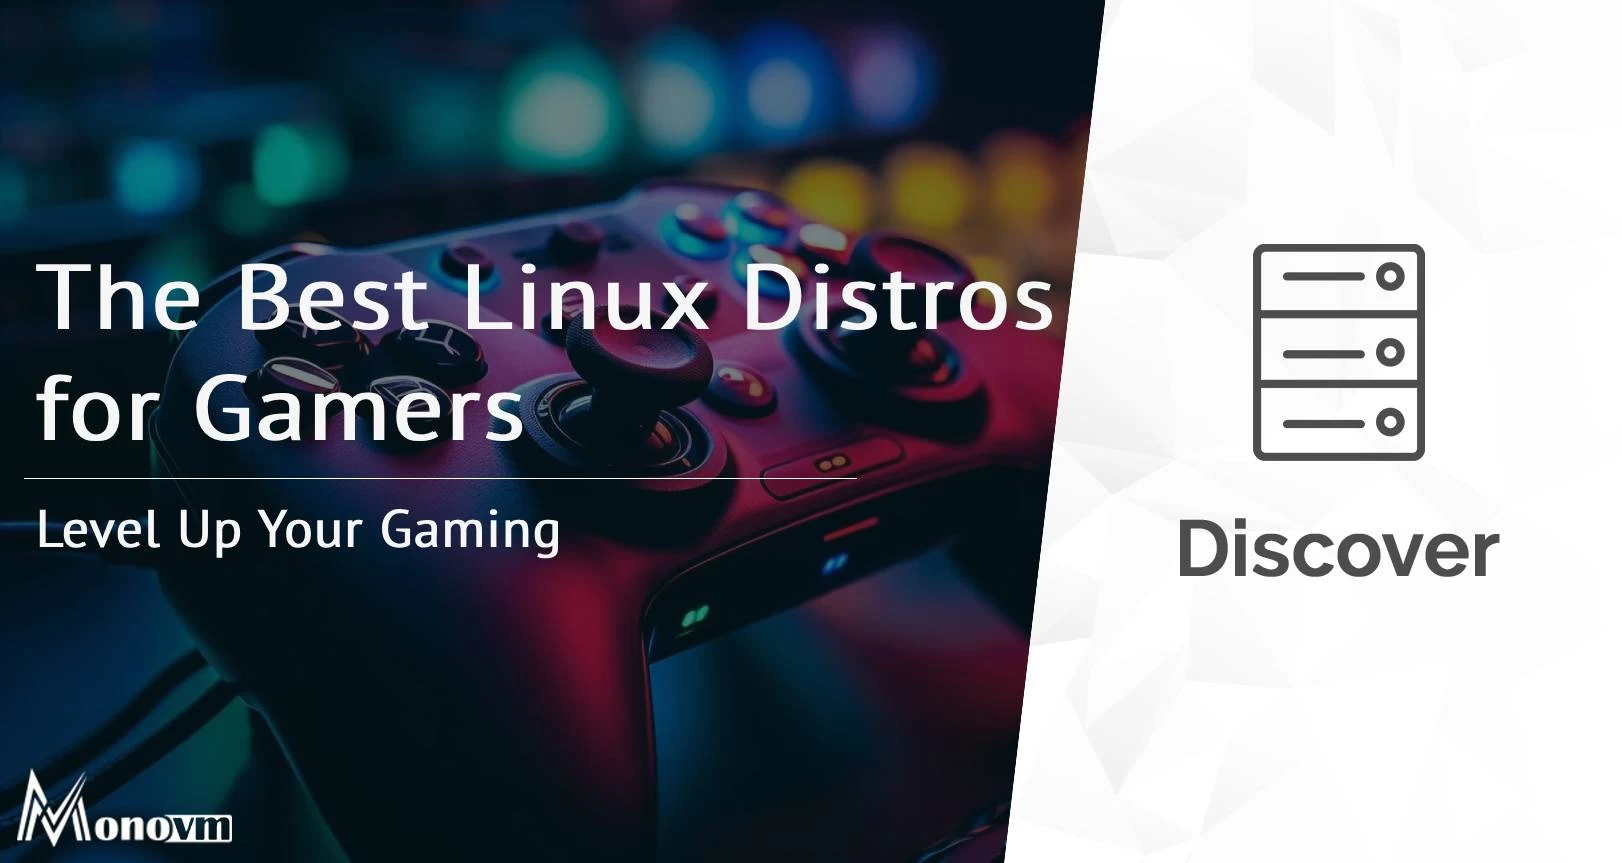 The Best Linux Distros for Gamers: Level Up Your Gaming